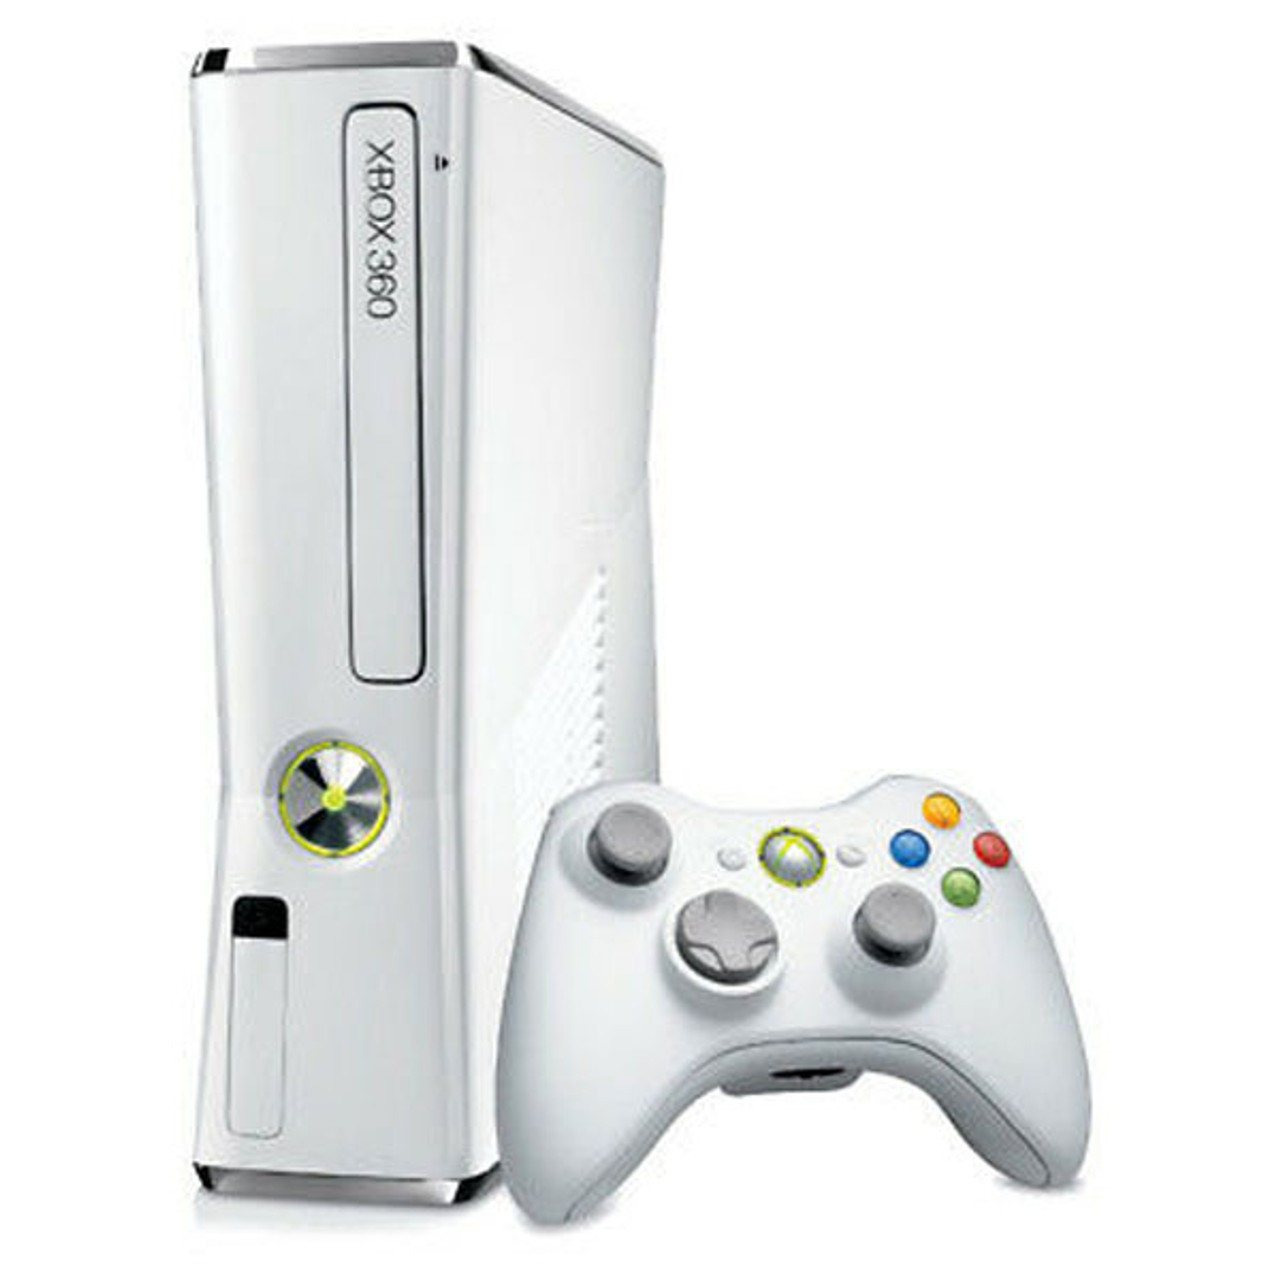 Xbox 360 4GB White System For Sale | DKOldies